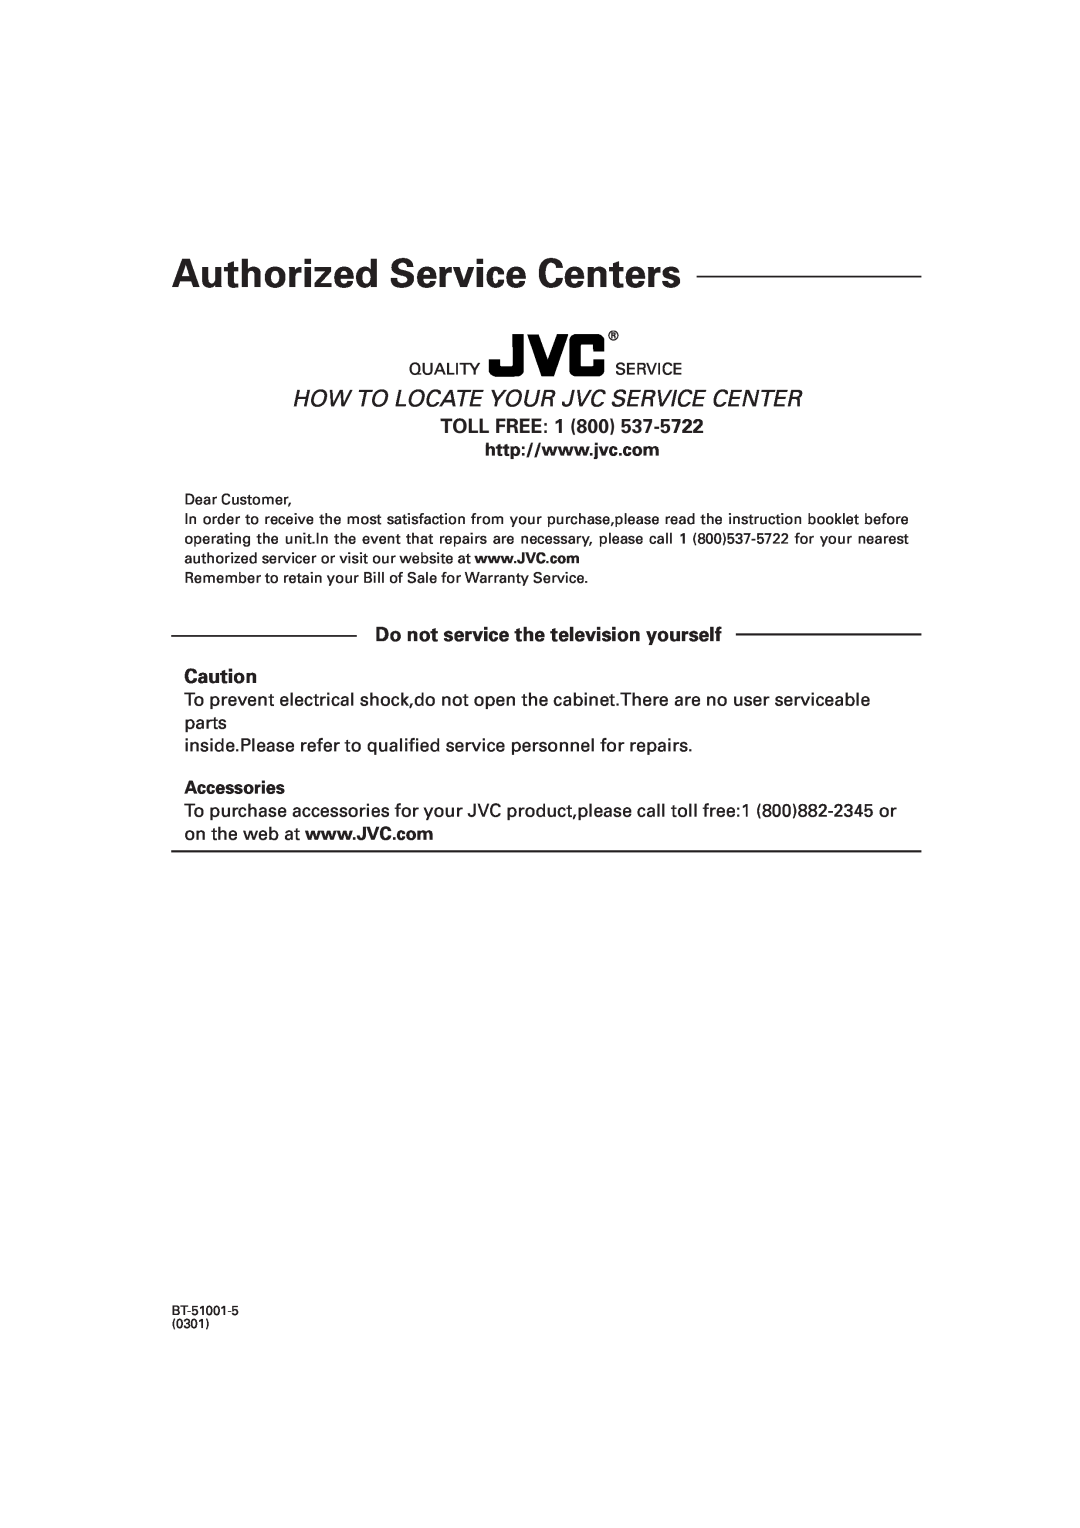 JVC FS-A52 manual Toll Free, Do not service the television yourself, Authorized Service Centers, Accessories 